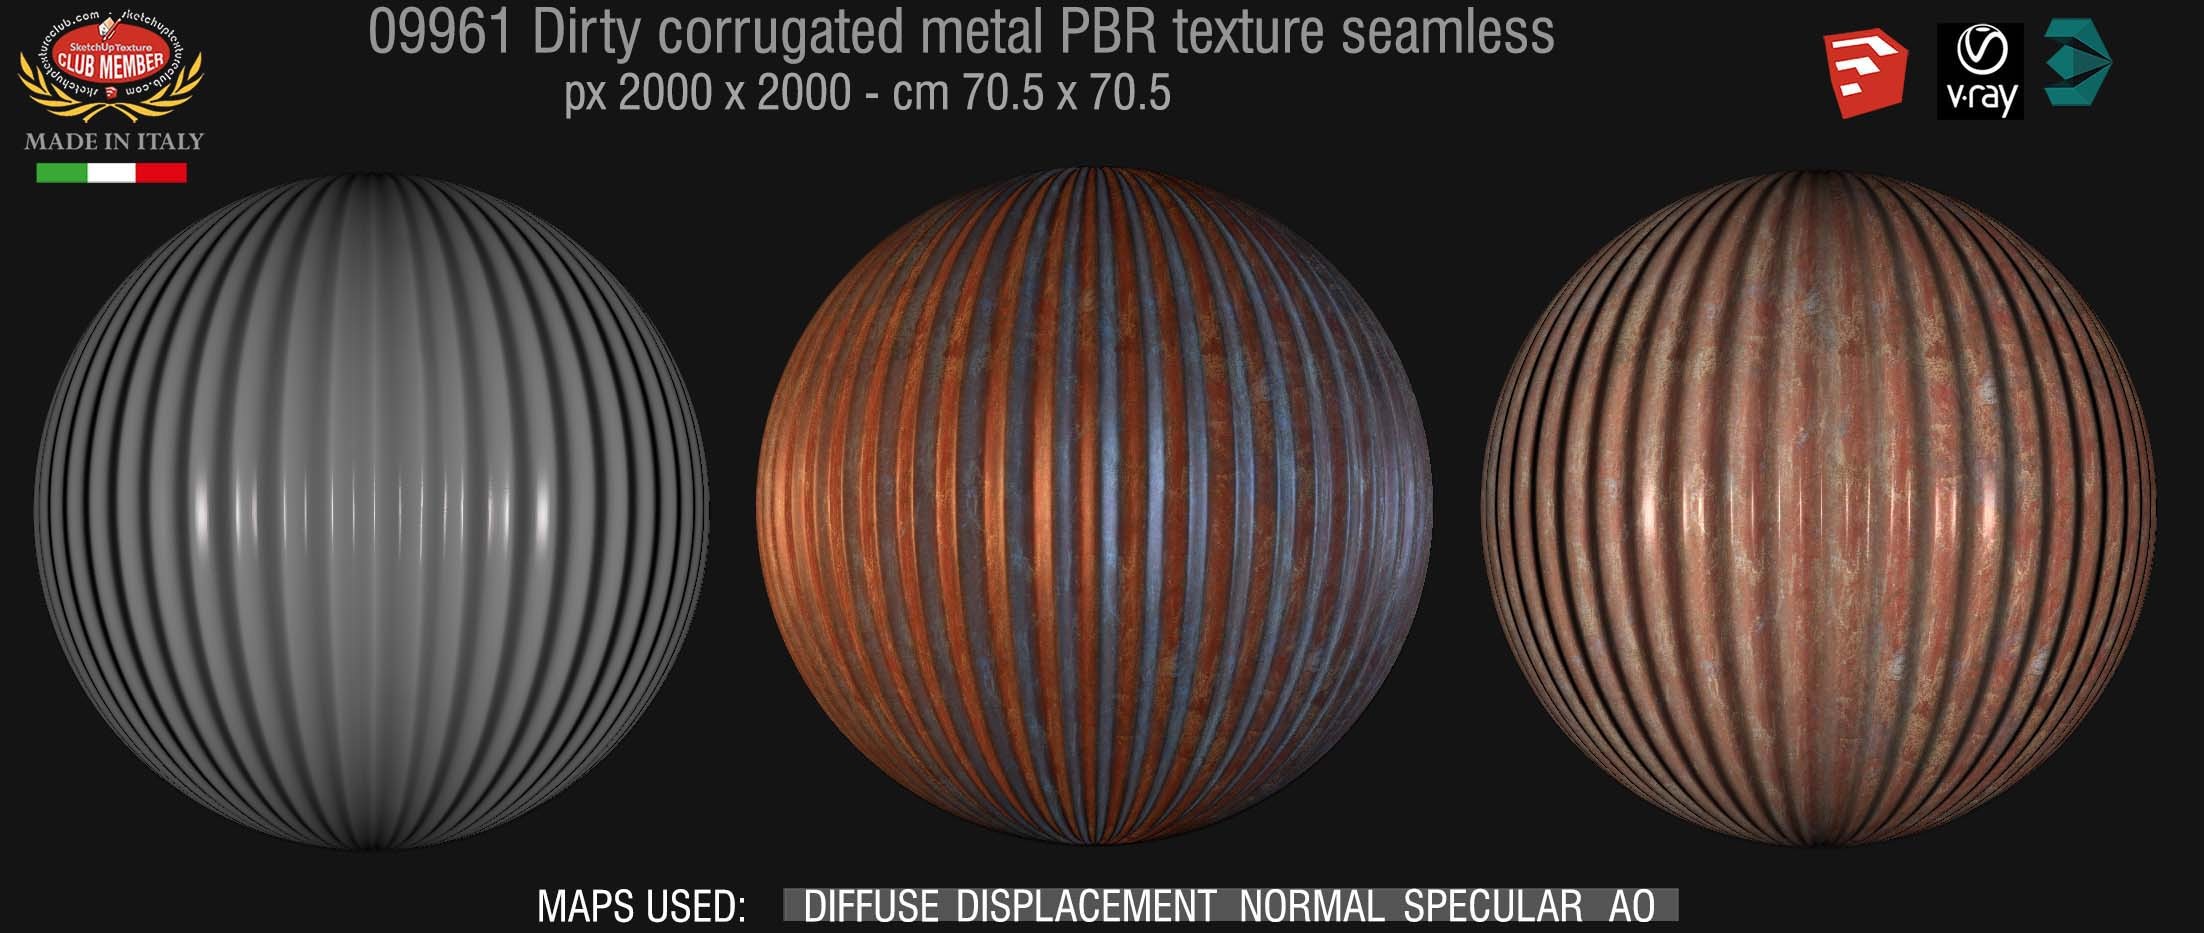 09961 Dirty corrugated metal PBR texture seamless DEMO